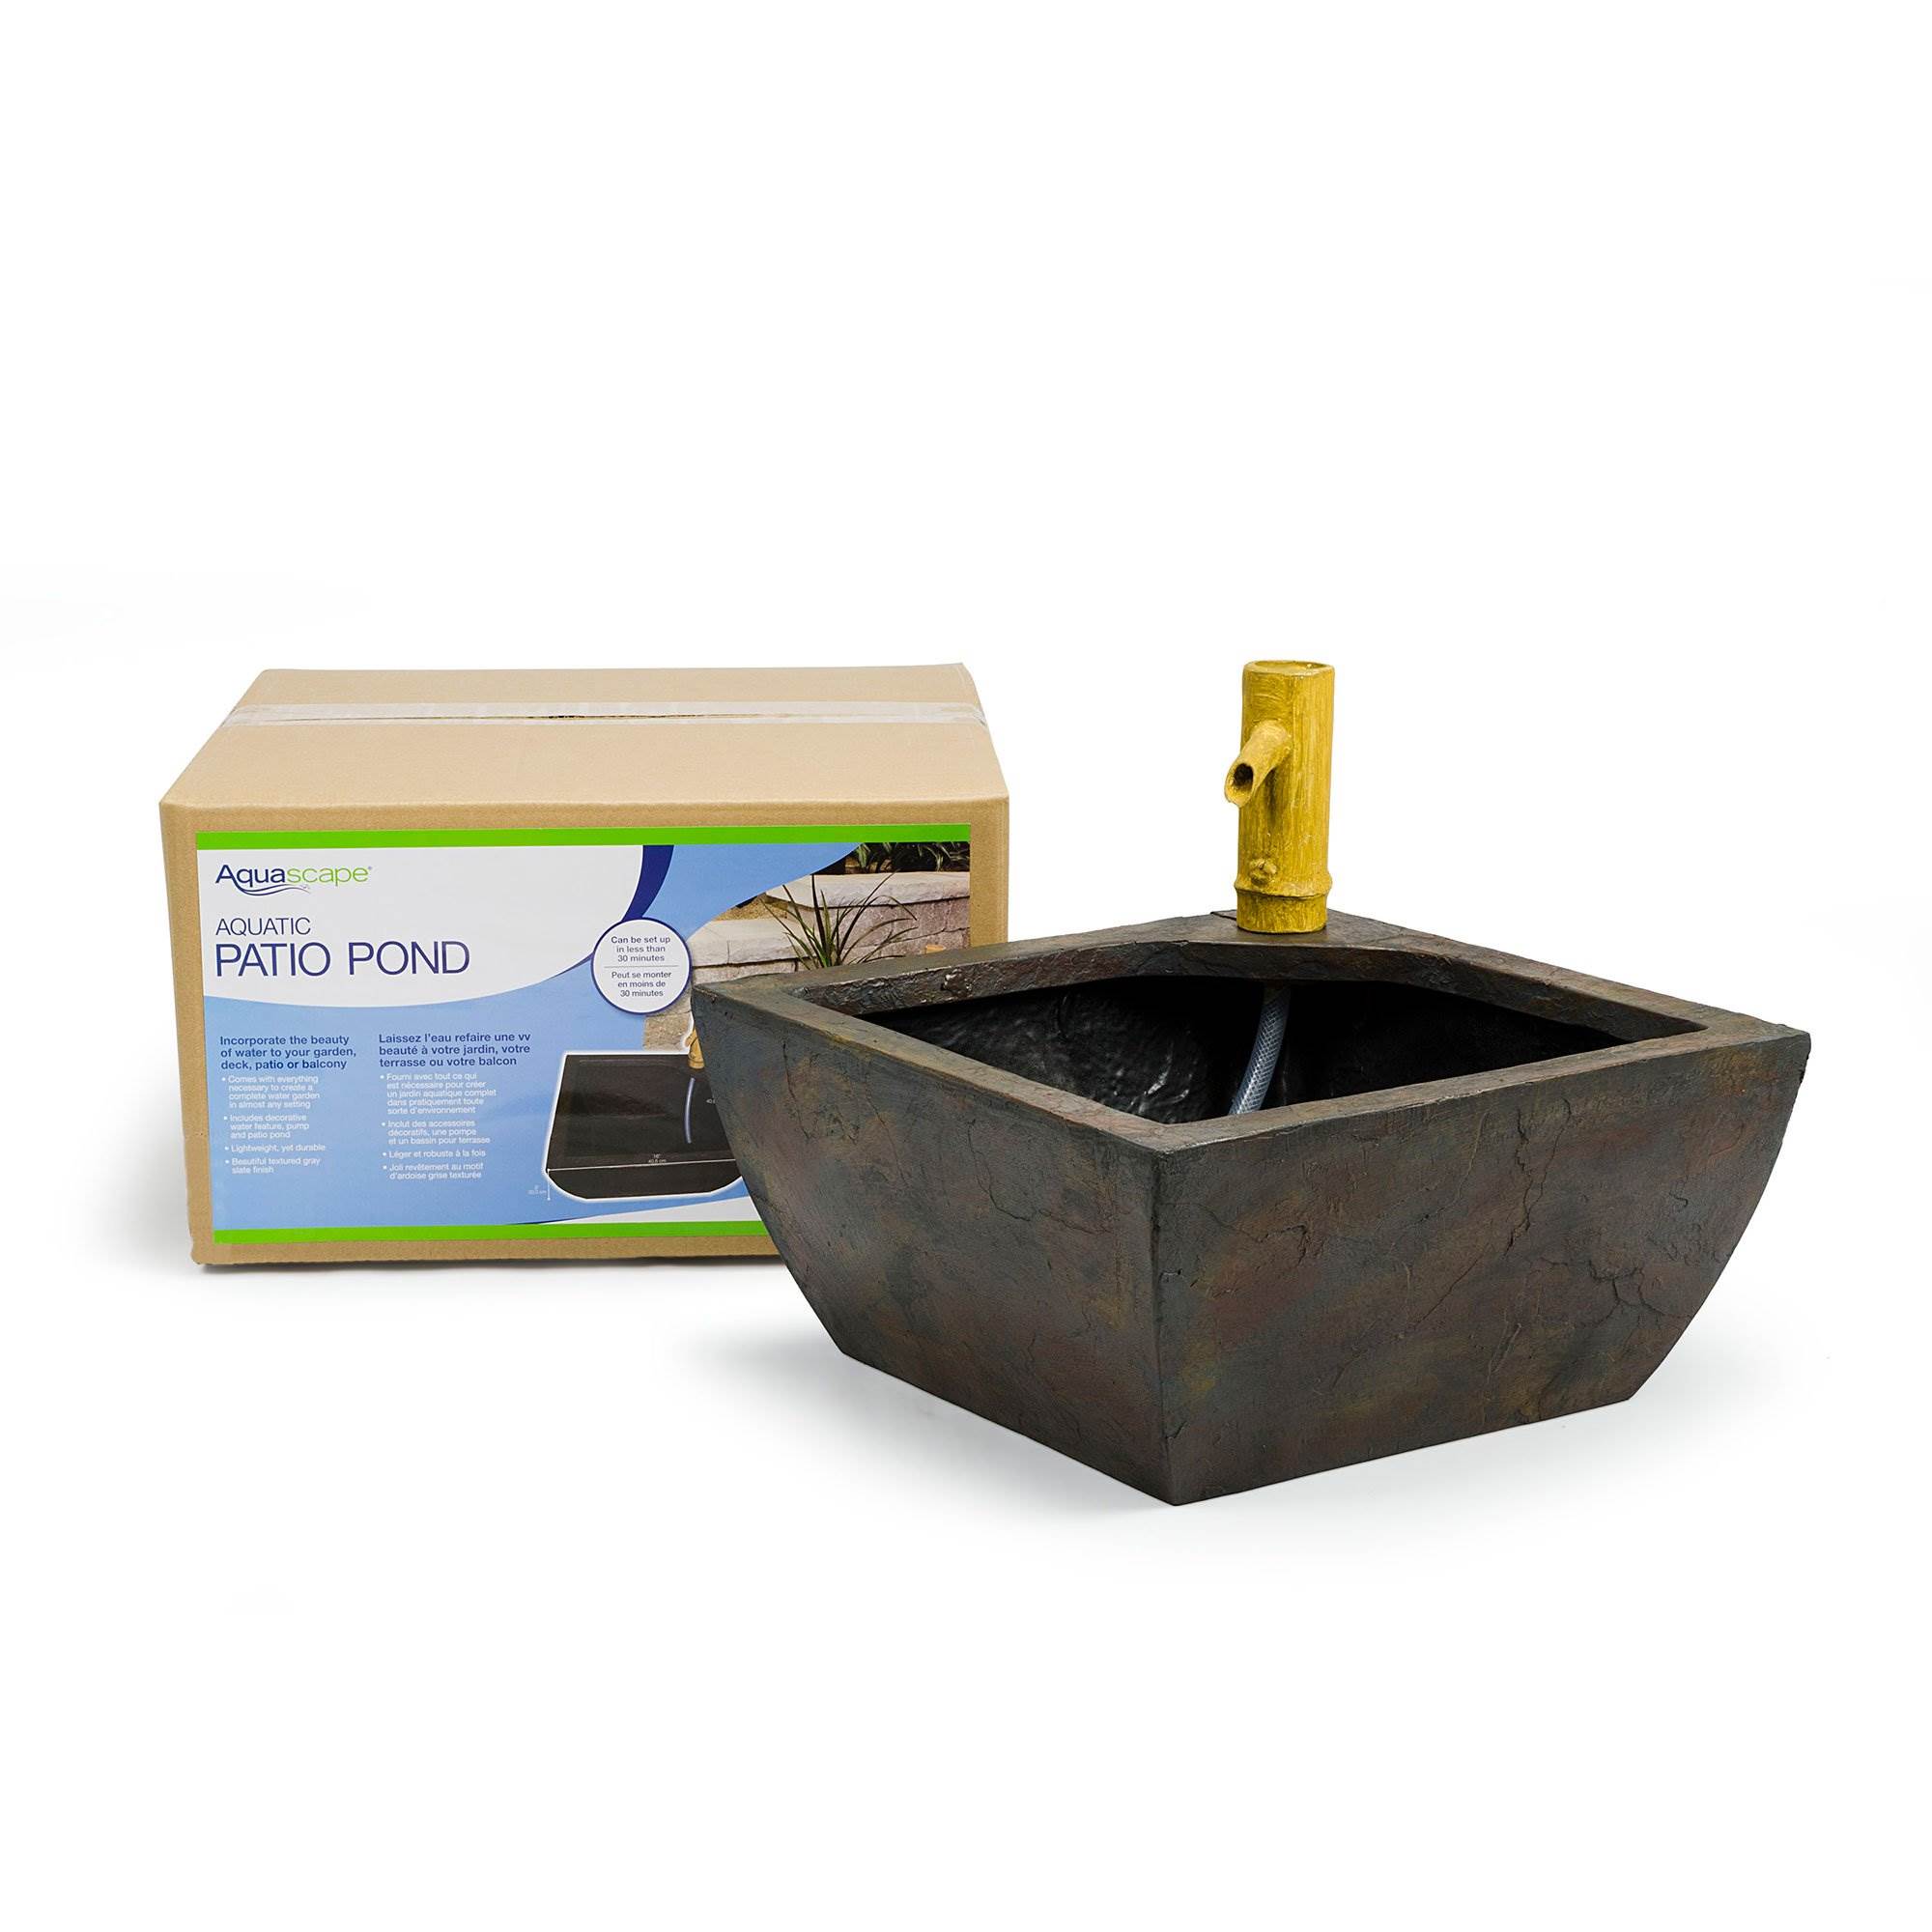 Aquascape Aquatic Pond Water Garden Planter Kit with Bamboo Fountain